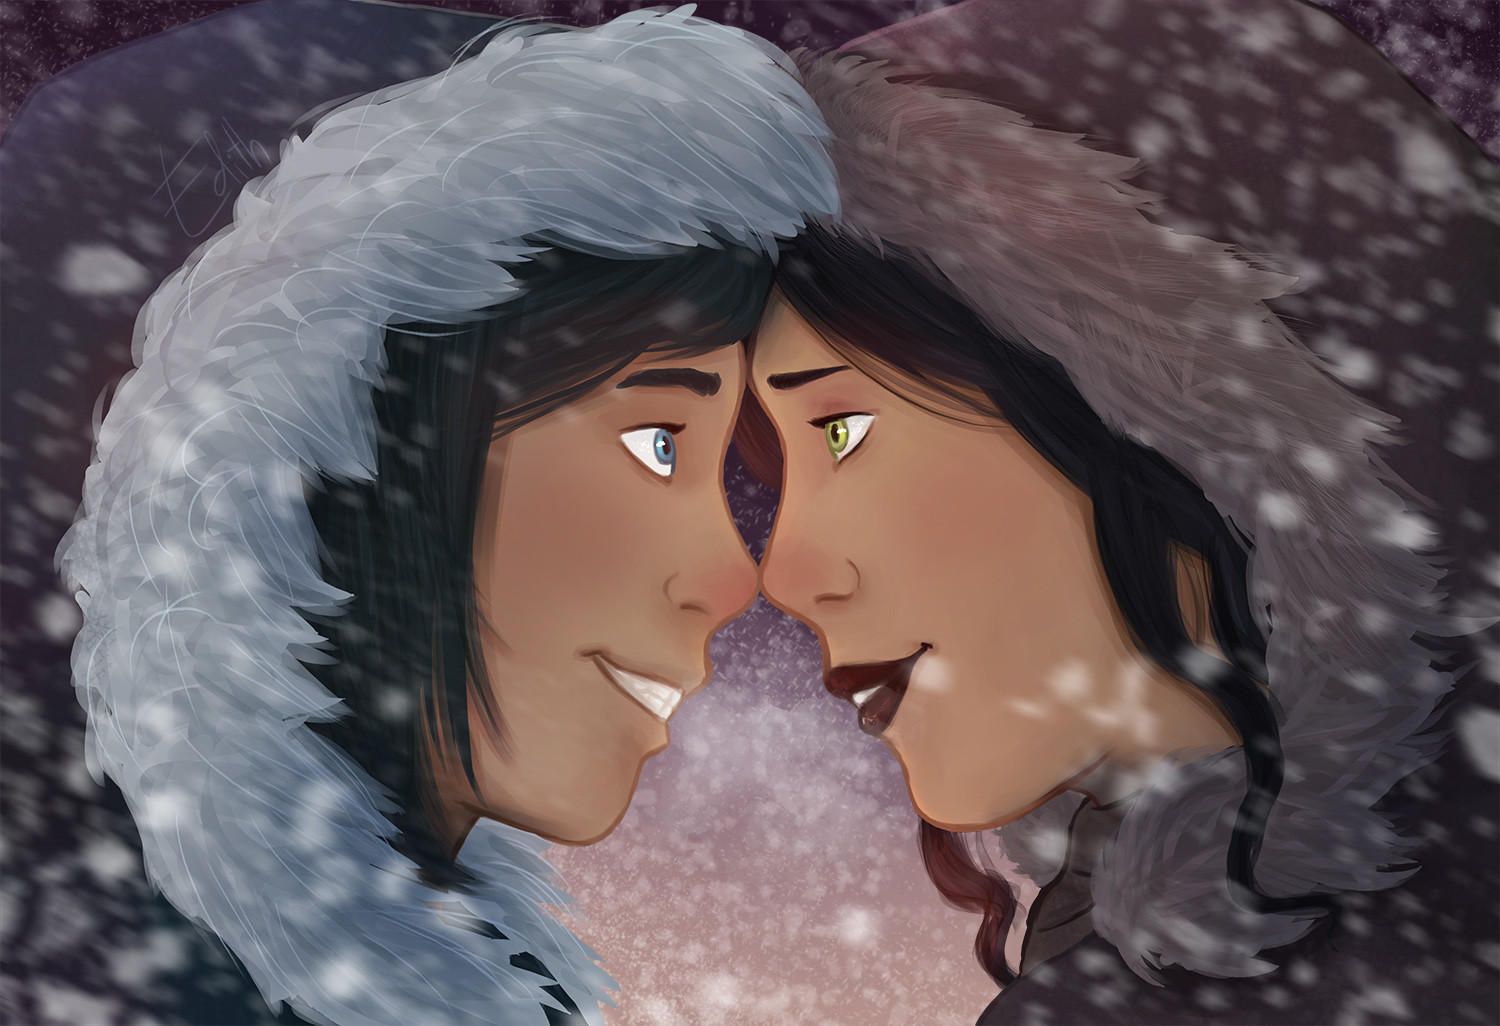 Korra and Asami from Legend of Korra - in celebration of the finale 